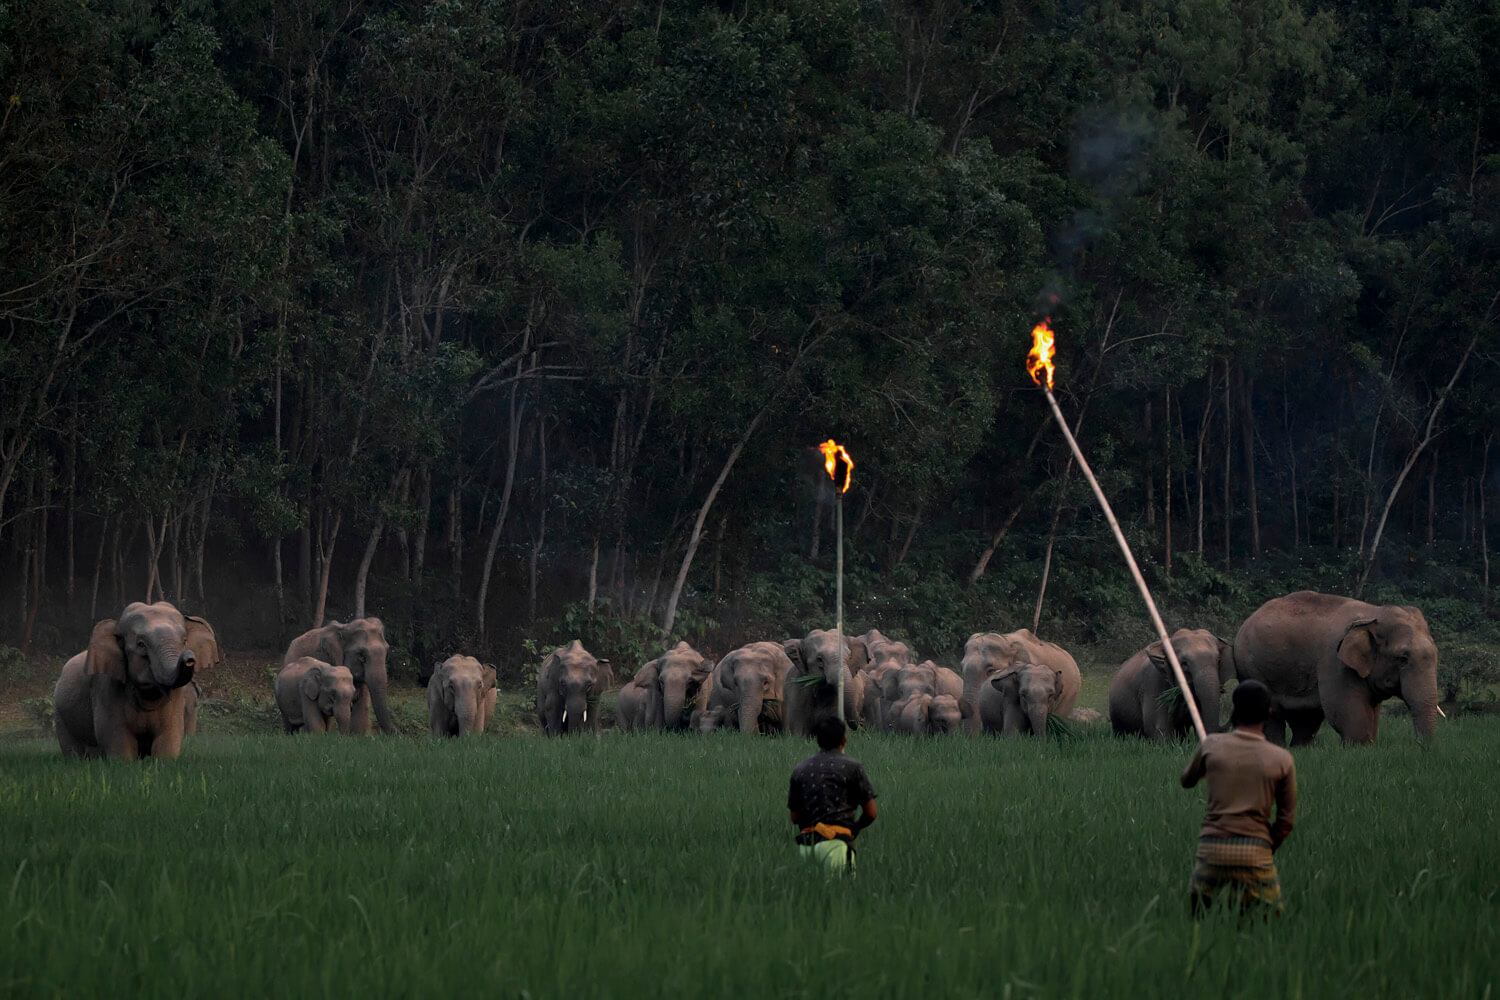 In a twilight-lit field, a herd of elephants is cautiously watched by two individuals holding flaming torches, creating a striking contrast between the natural majesty of the wildlife and the human presence in this serene yet tense standoff.